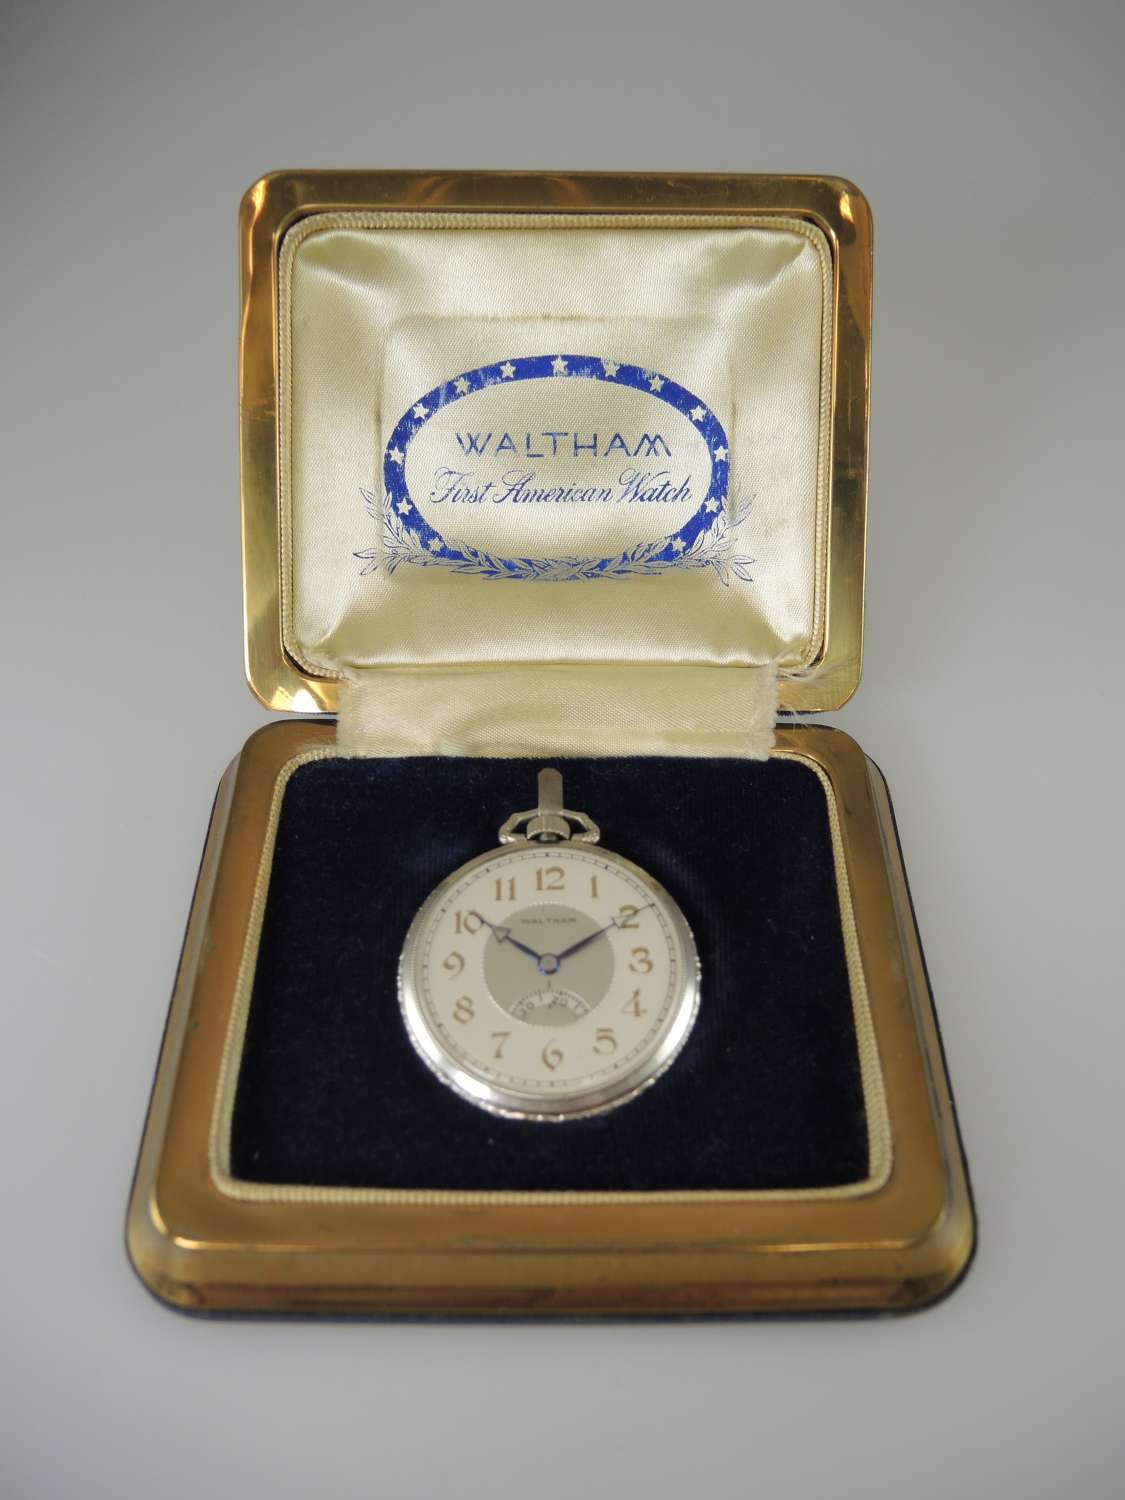 Waltham pocket watch with revolving seconds. With Box c1930